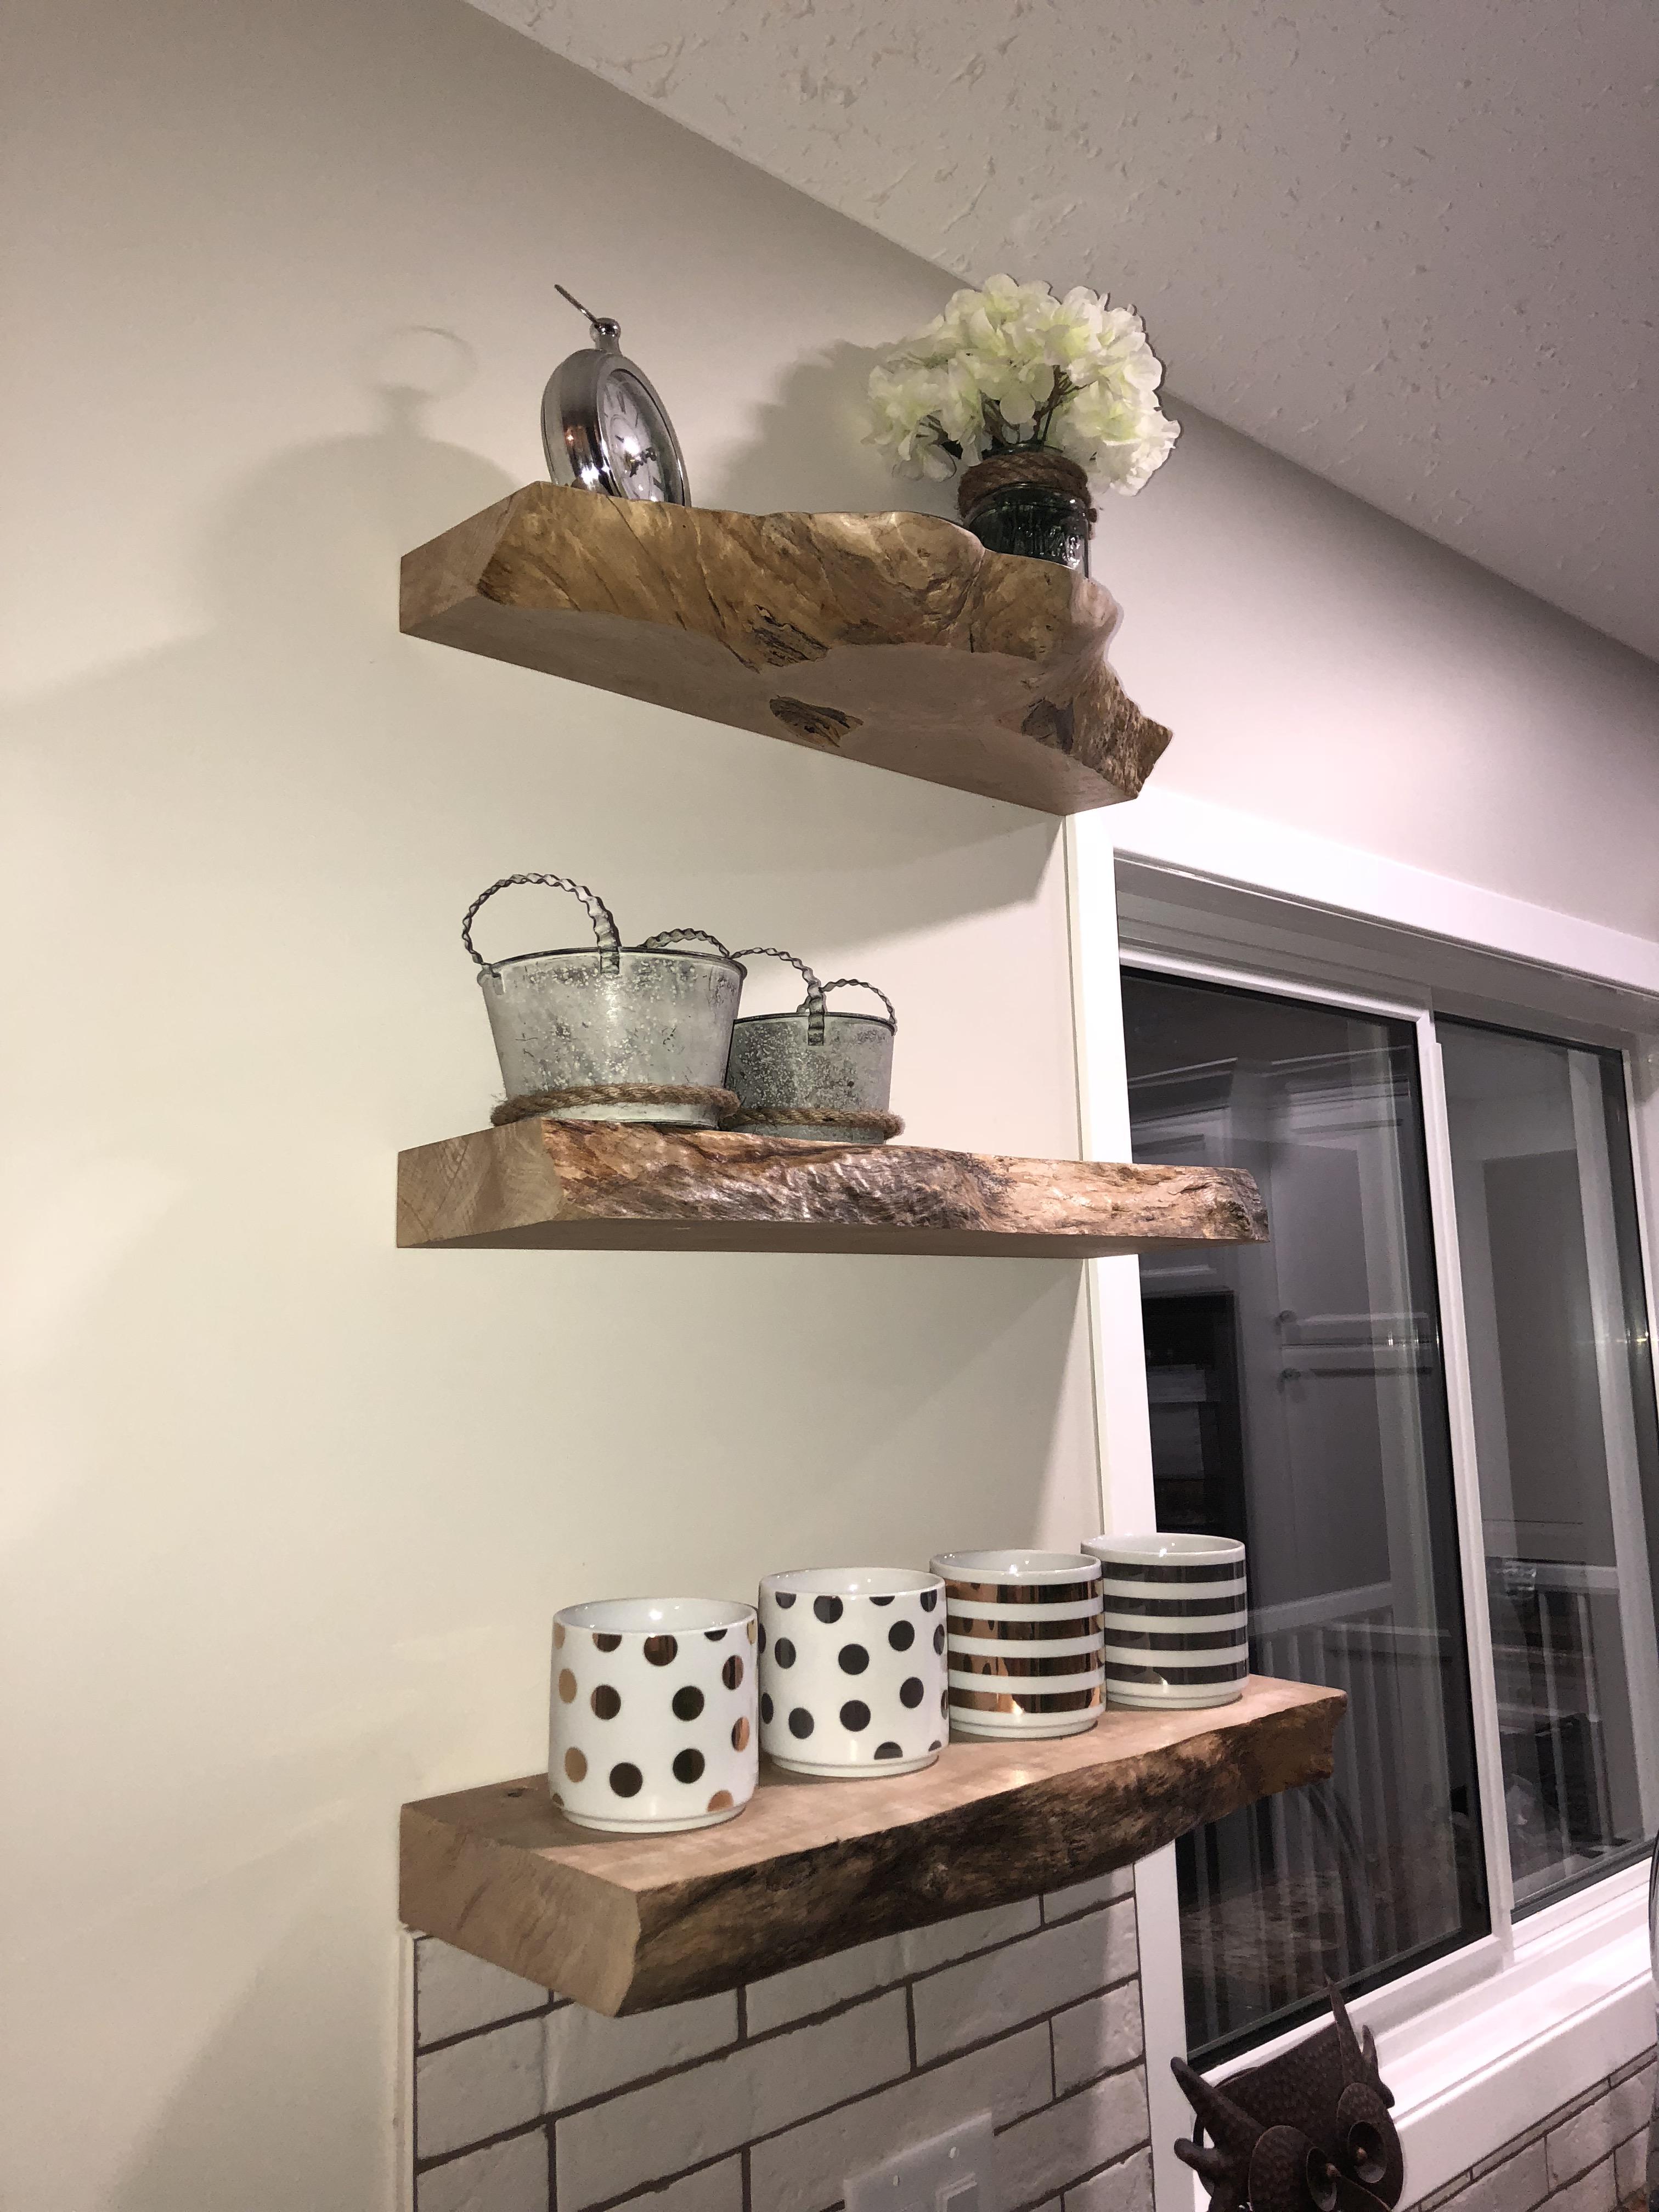 tried some floating shelves the end kitchen rather than small another cabinet computer table shelf media center narrow book ledge brands crown molding mantel wood support design